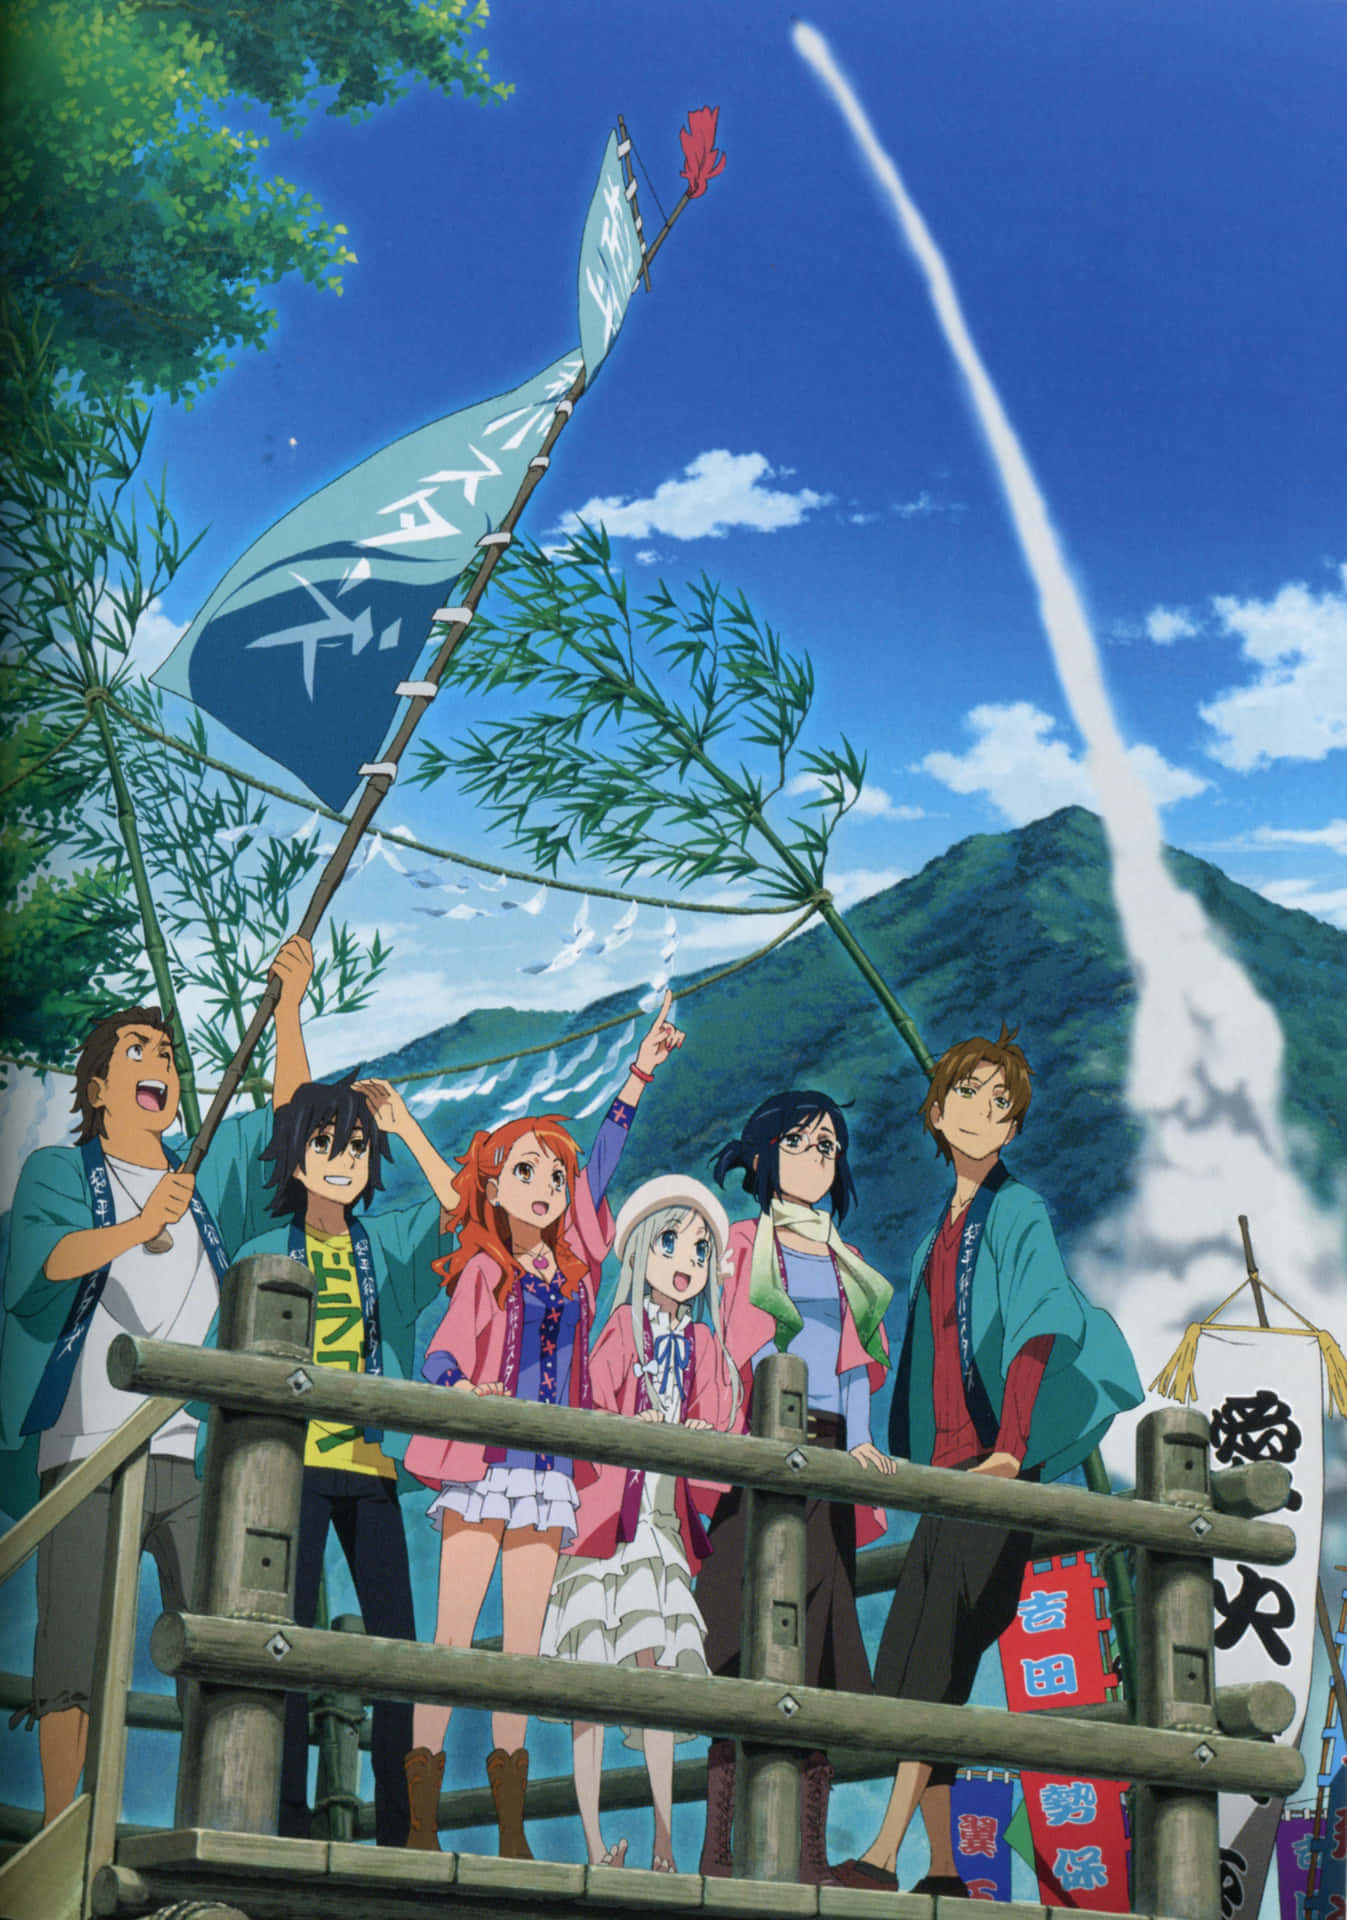 A Serene Moment From Anohana Anime Series